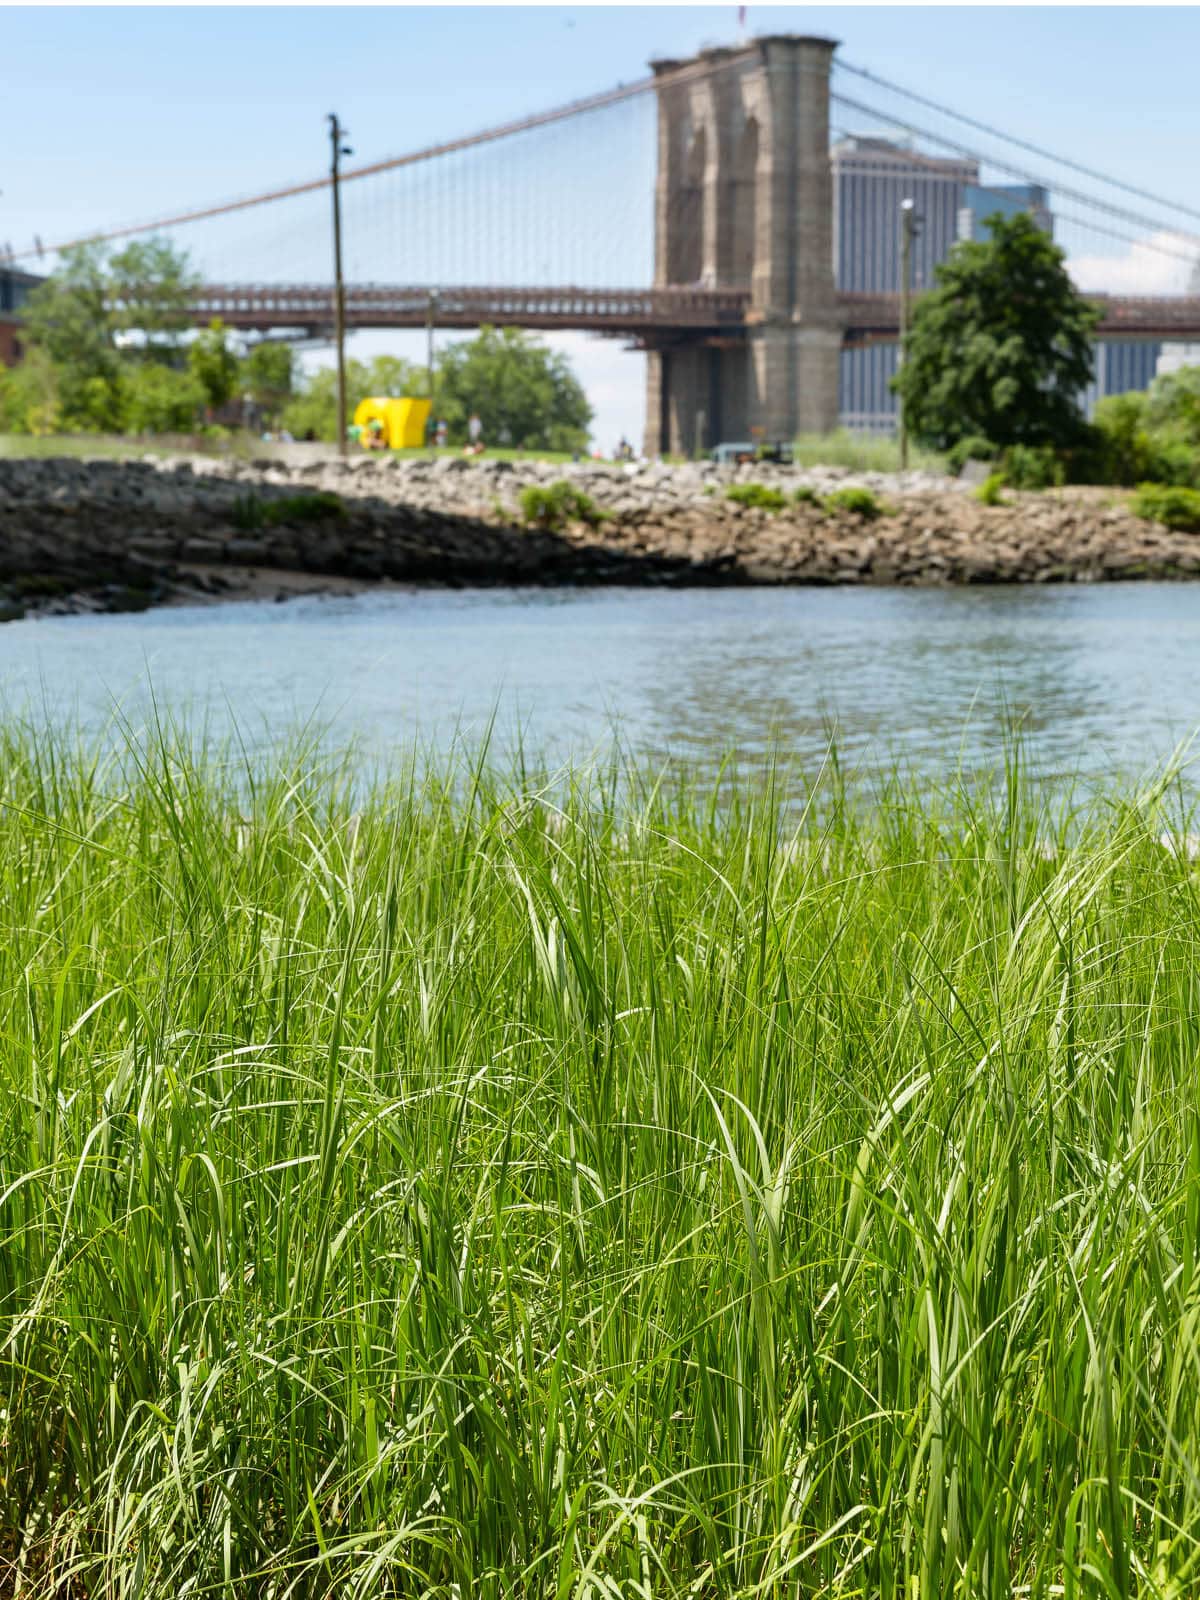 Close up of grasses in the John Street Tidal Marsh on a sunny day. The Brooklyn Bridge is seen in the background.